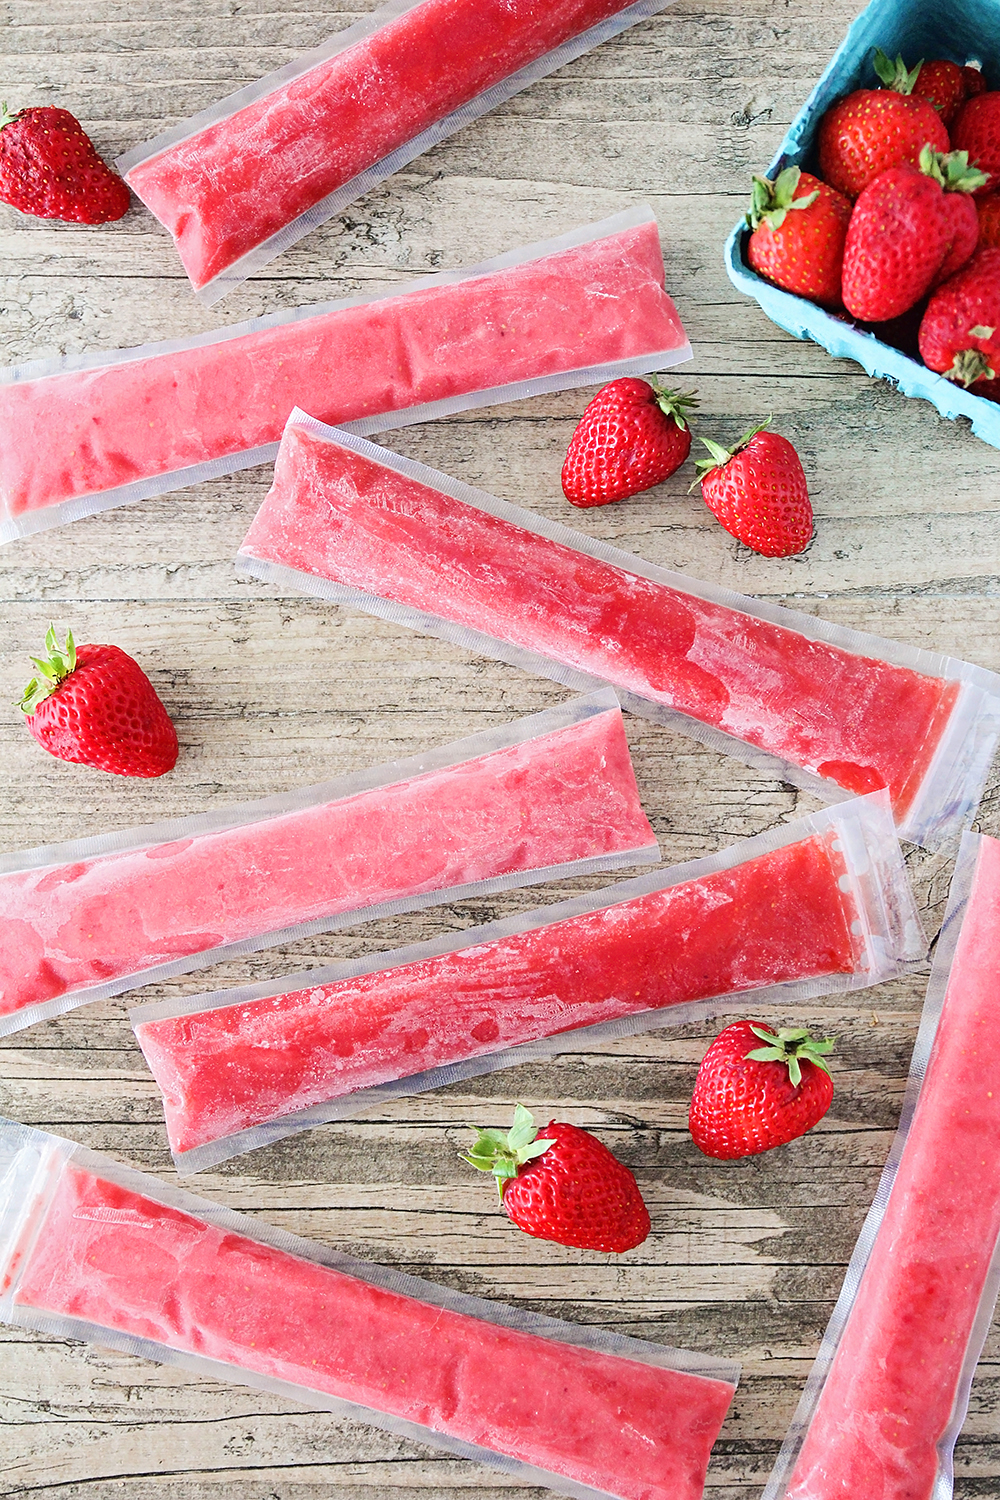 These healthy and delicious strawberry freezer pops have only three ingredients, and are full of strawberry flavor. They're so simple to make, and the kids will love them!